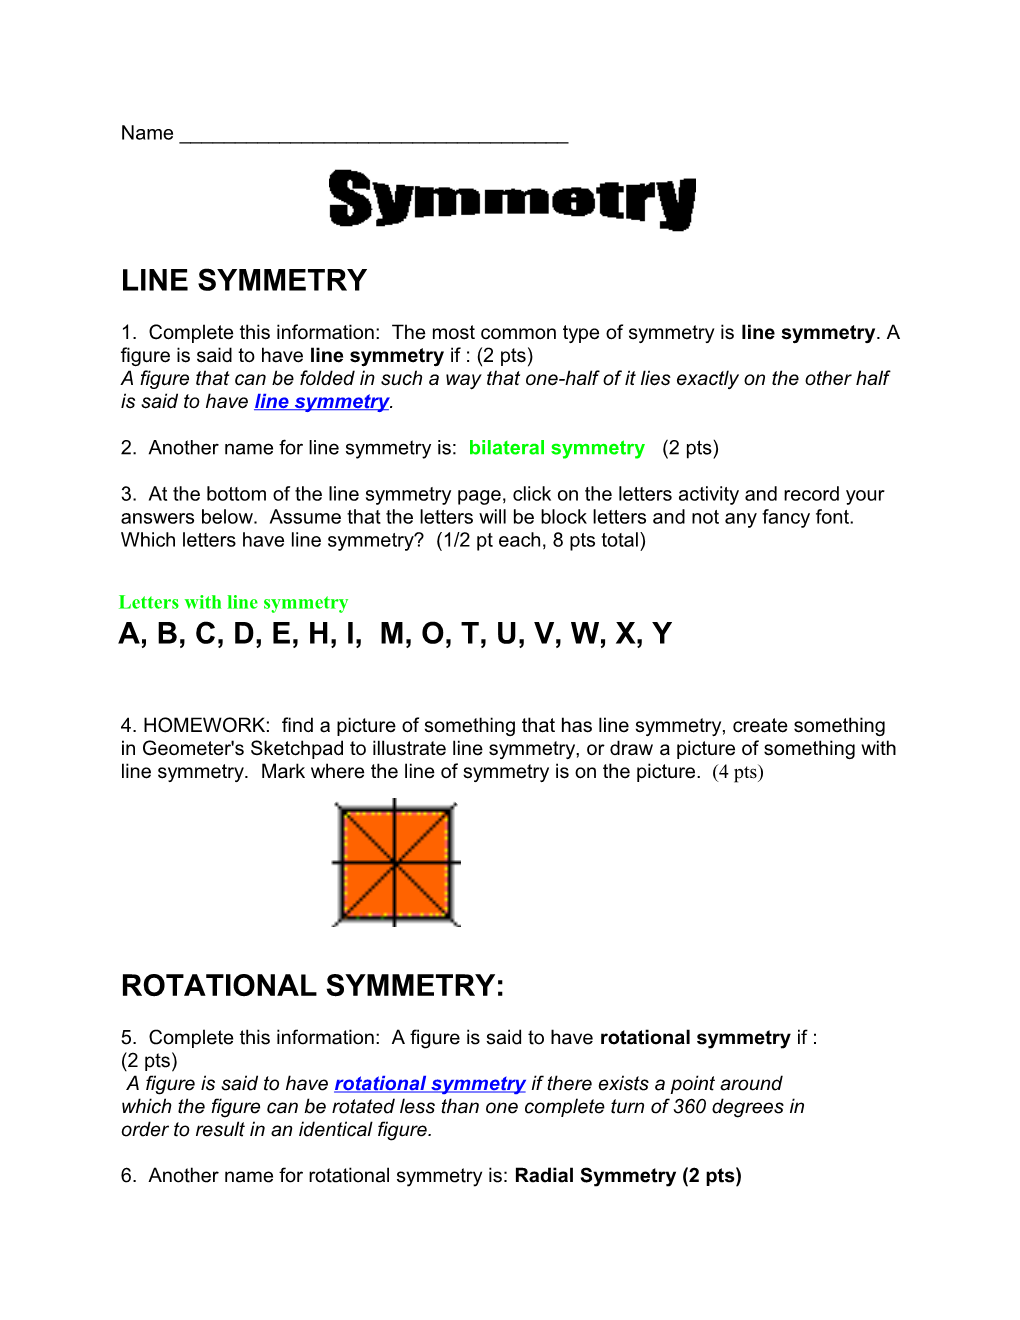 2. Another Name for Line Symmetry Is: Bilateral Symmetry (2 Pts)